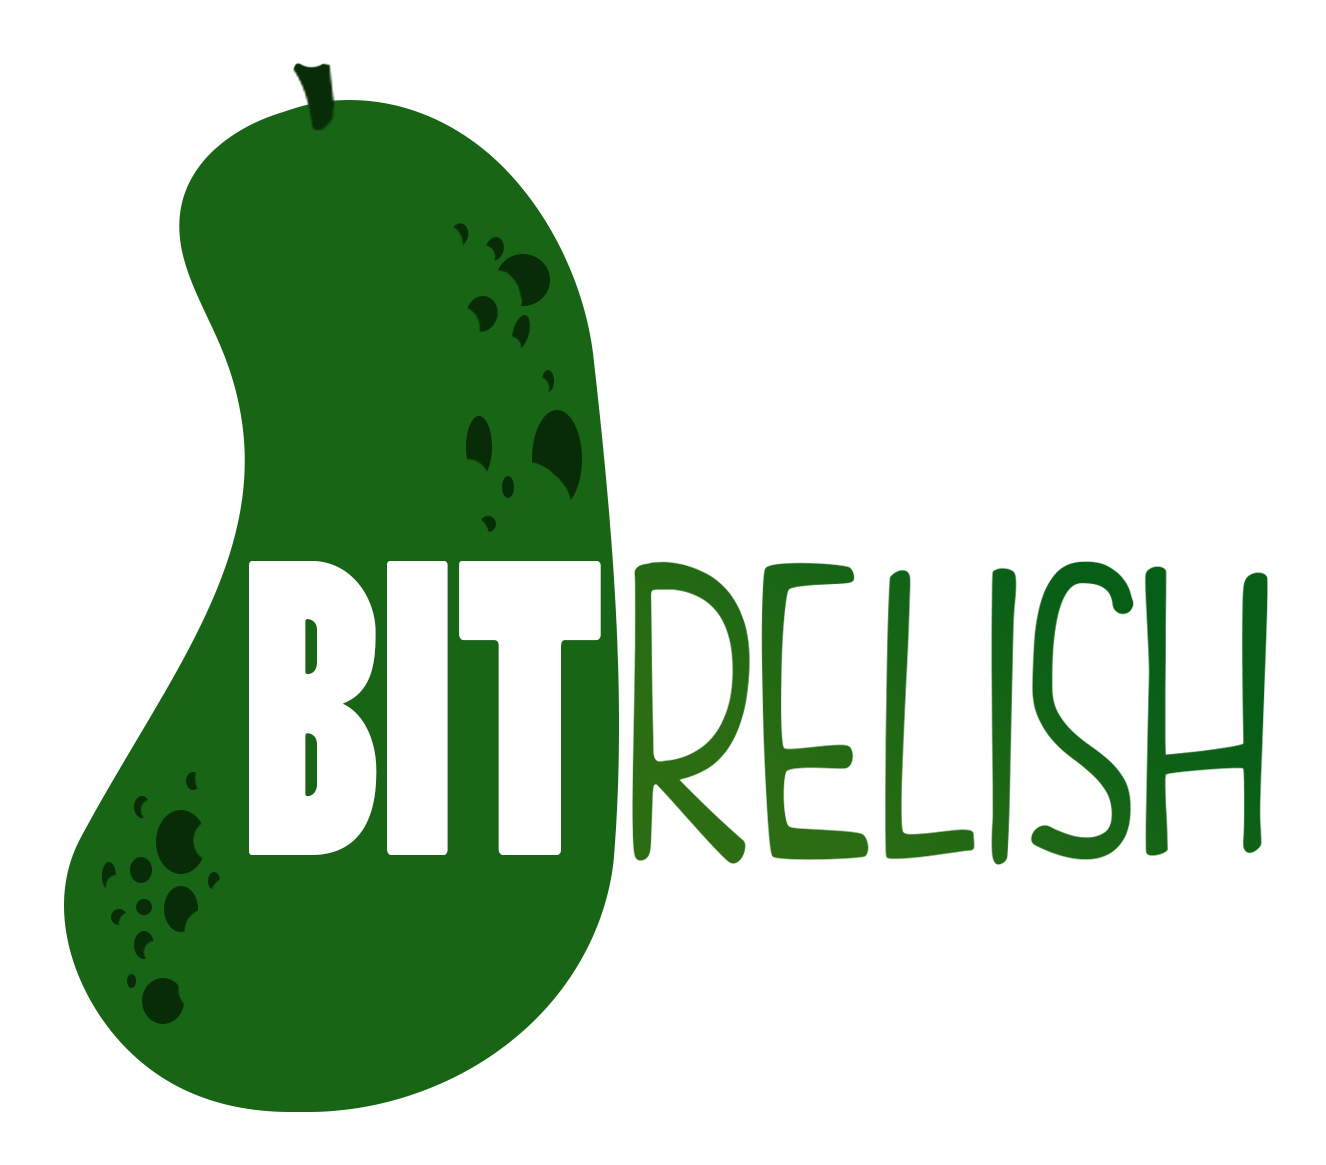 Bitrelish | On a Mission to Delishify